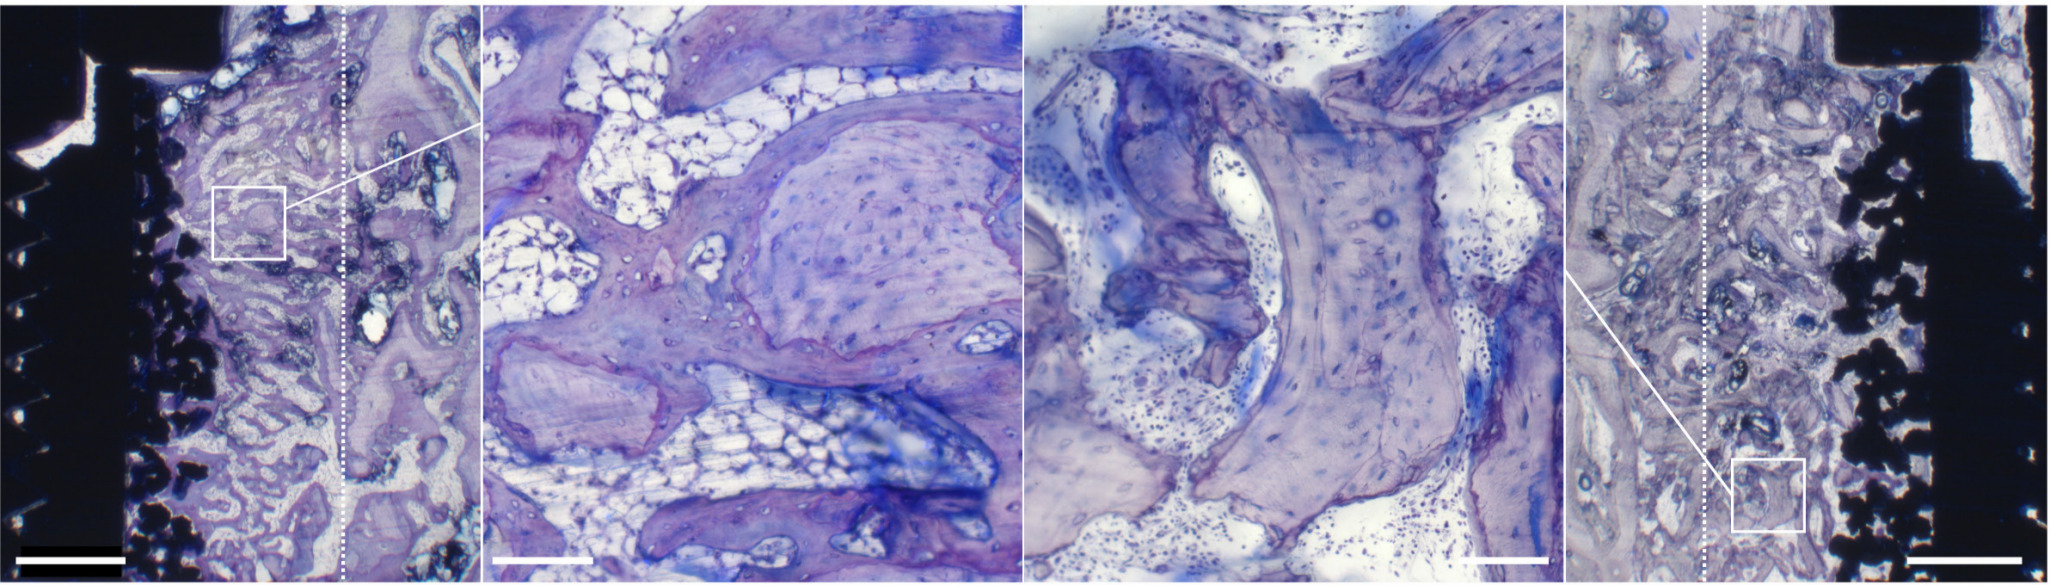 Fig. 3 
            Representative histological sections of the zoledronate-treated groups (toluidine blue). Systemic zoledronate (SZ) group (far left; ×1.25) and local zoledronate (LZ) group (far right; ×1.25). Solid white frames in SZ (×1.25) and LZ (×1.25) mark the positions of the two central images (×10). Bar (×1.25/×10) = 1.0/0.1 mm. Sections are cut longitudinally to the long axis of the implant. Dotted line marks original drill-border. Allograft appears as a lightly stained lamellar structure with empty fusiform lacunae. Lamellar bone appears as allograft having fusiform lacunae with cells. New bone presents as a disorganized, dark-stained structure having round lacunae with cells. SZ (×1.25): extensive remodelling has occurred, with a few small pieces of allograft in the peri-implant gap being covered with new bone, which exhibits high interconnectivity in the peri-implant gap and into the porous surface coating. SZ (×10): allograft with a thick layer of new bone and few resorption lacunae. The surface of the remaining allograft is covered with resorption lacunae, giving it a serrated appearance. LZ (×1.25): large pieces of allograft with thin layers of new bone displaying low interconnectivity in the peri-implant gap and into the porous implant surface. LZ (×10): allograft with ragged and intact edges, non-circumferential new bone coverage, and extensive number of resorption lacunae.
          